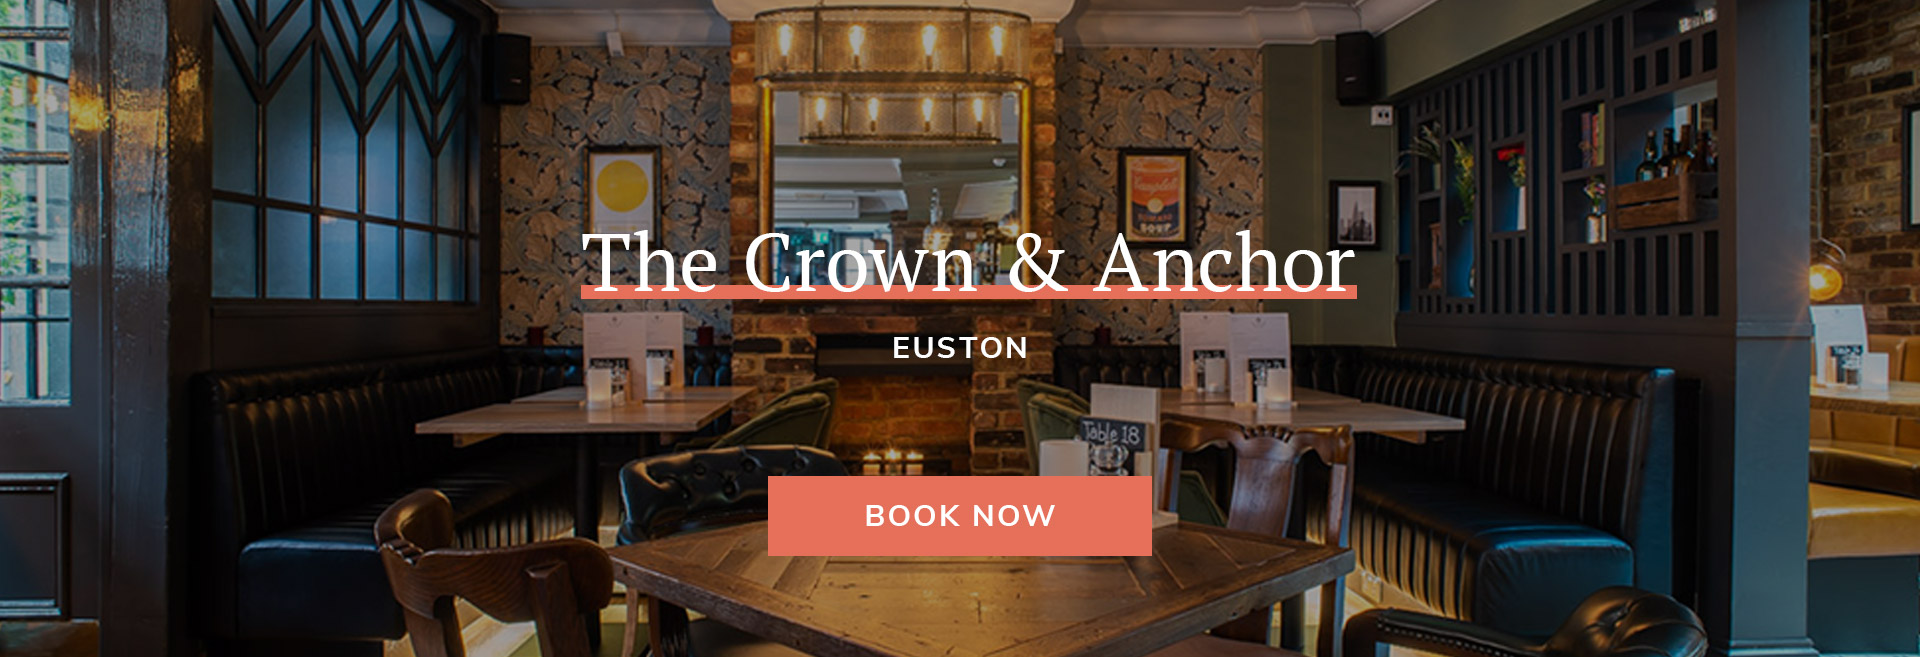 The Crown and Anchor Euston Banner 3